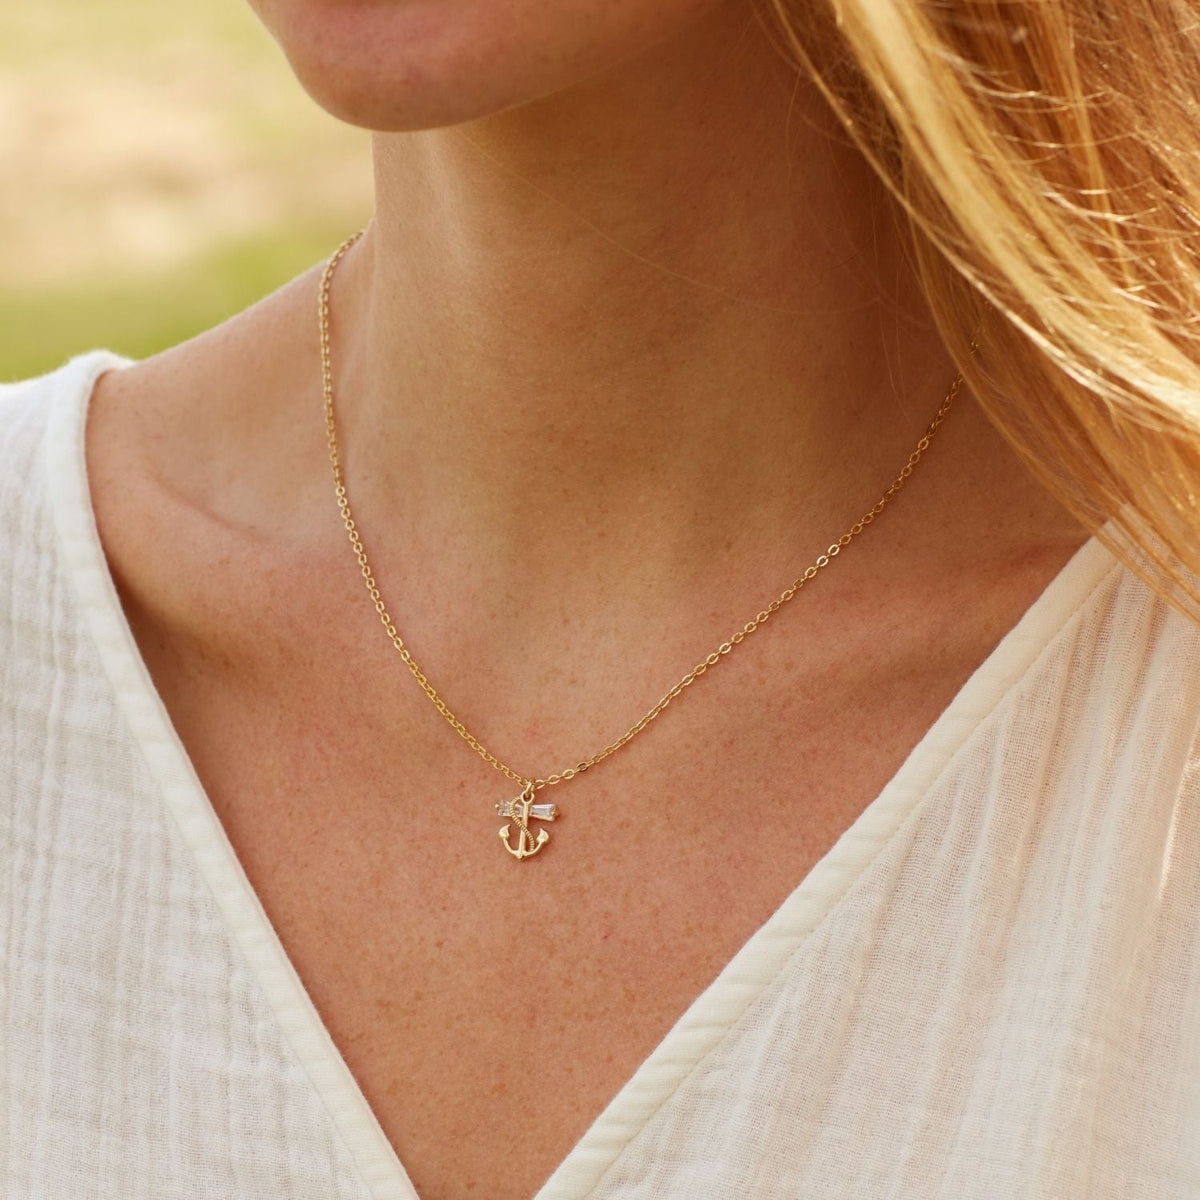 To the Mother of the Bride (From Daughter) | Today a Bride, Tomorrow a Wife | Anchor Necklace